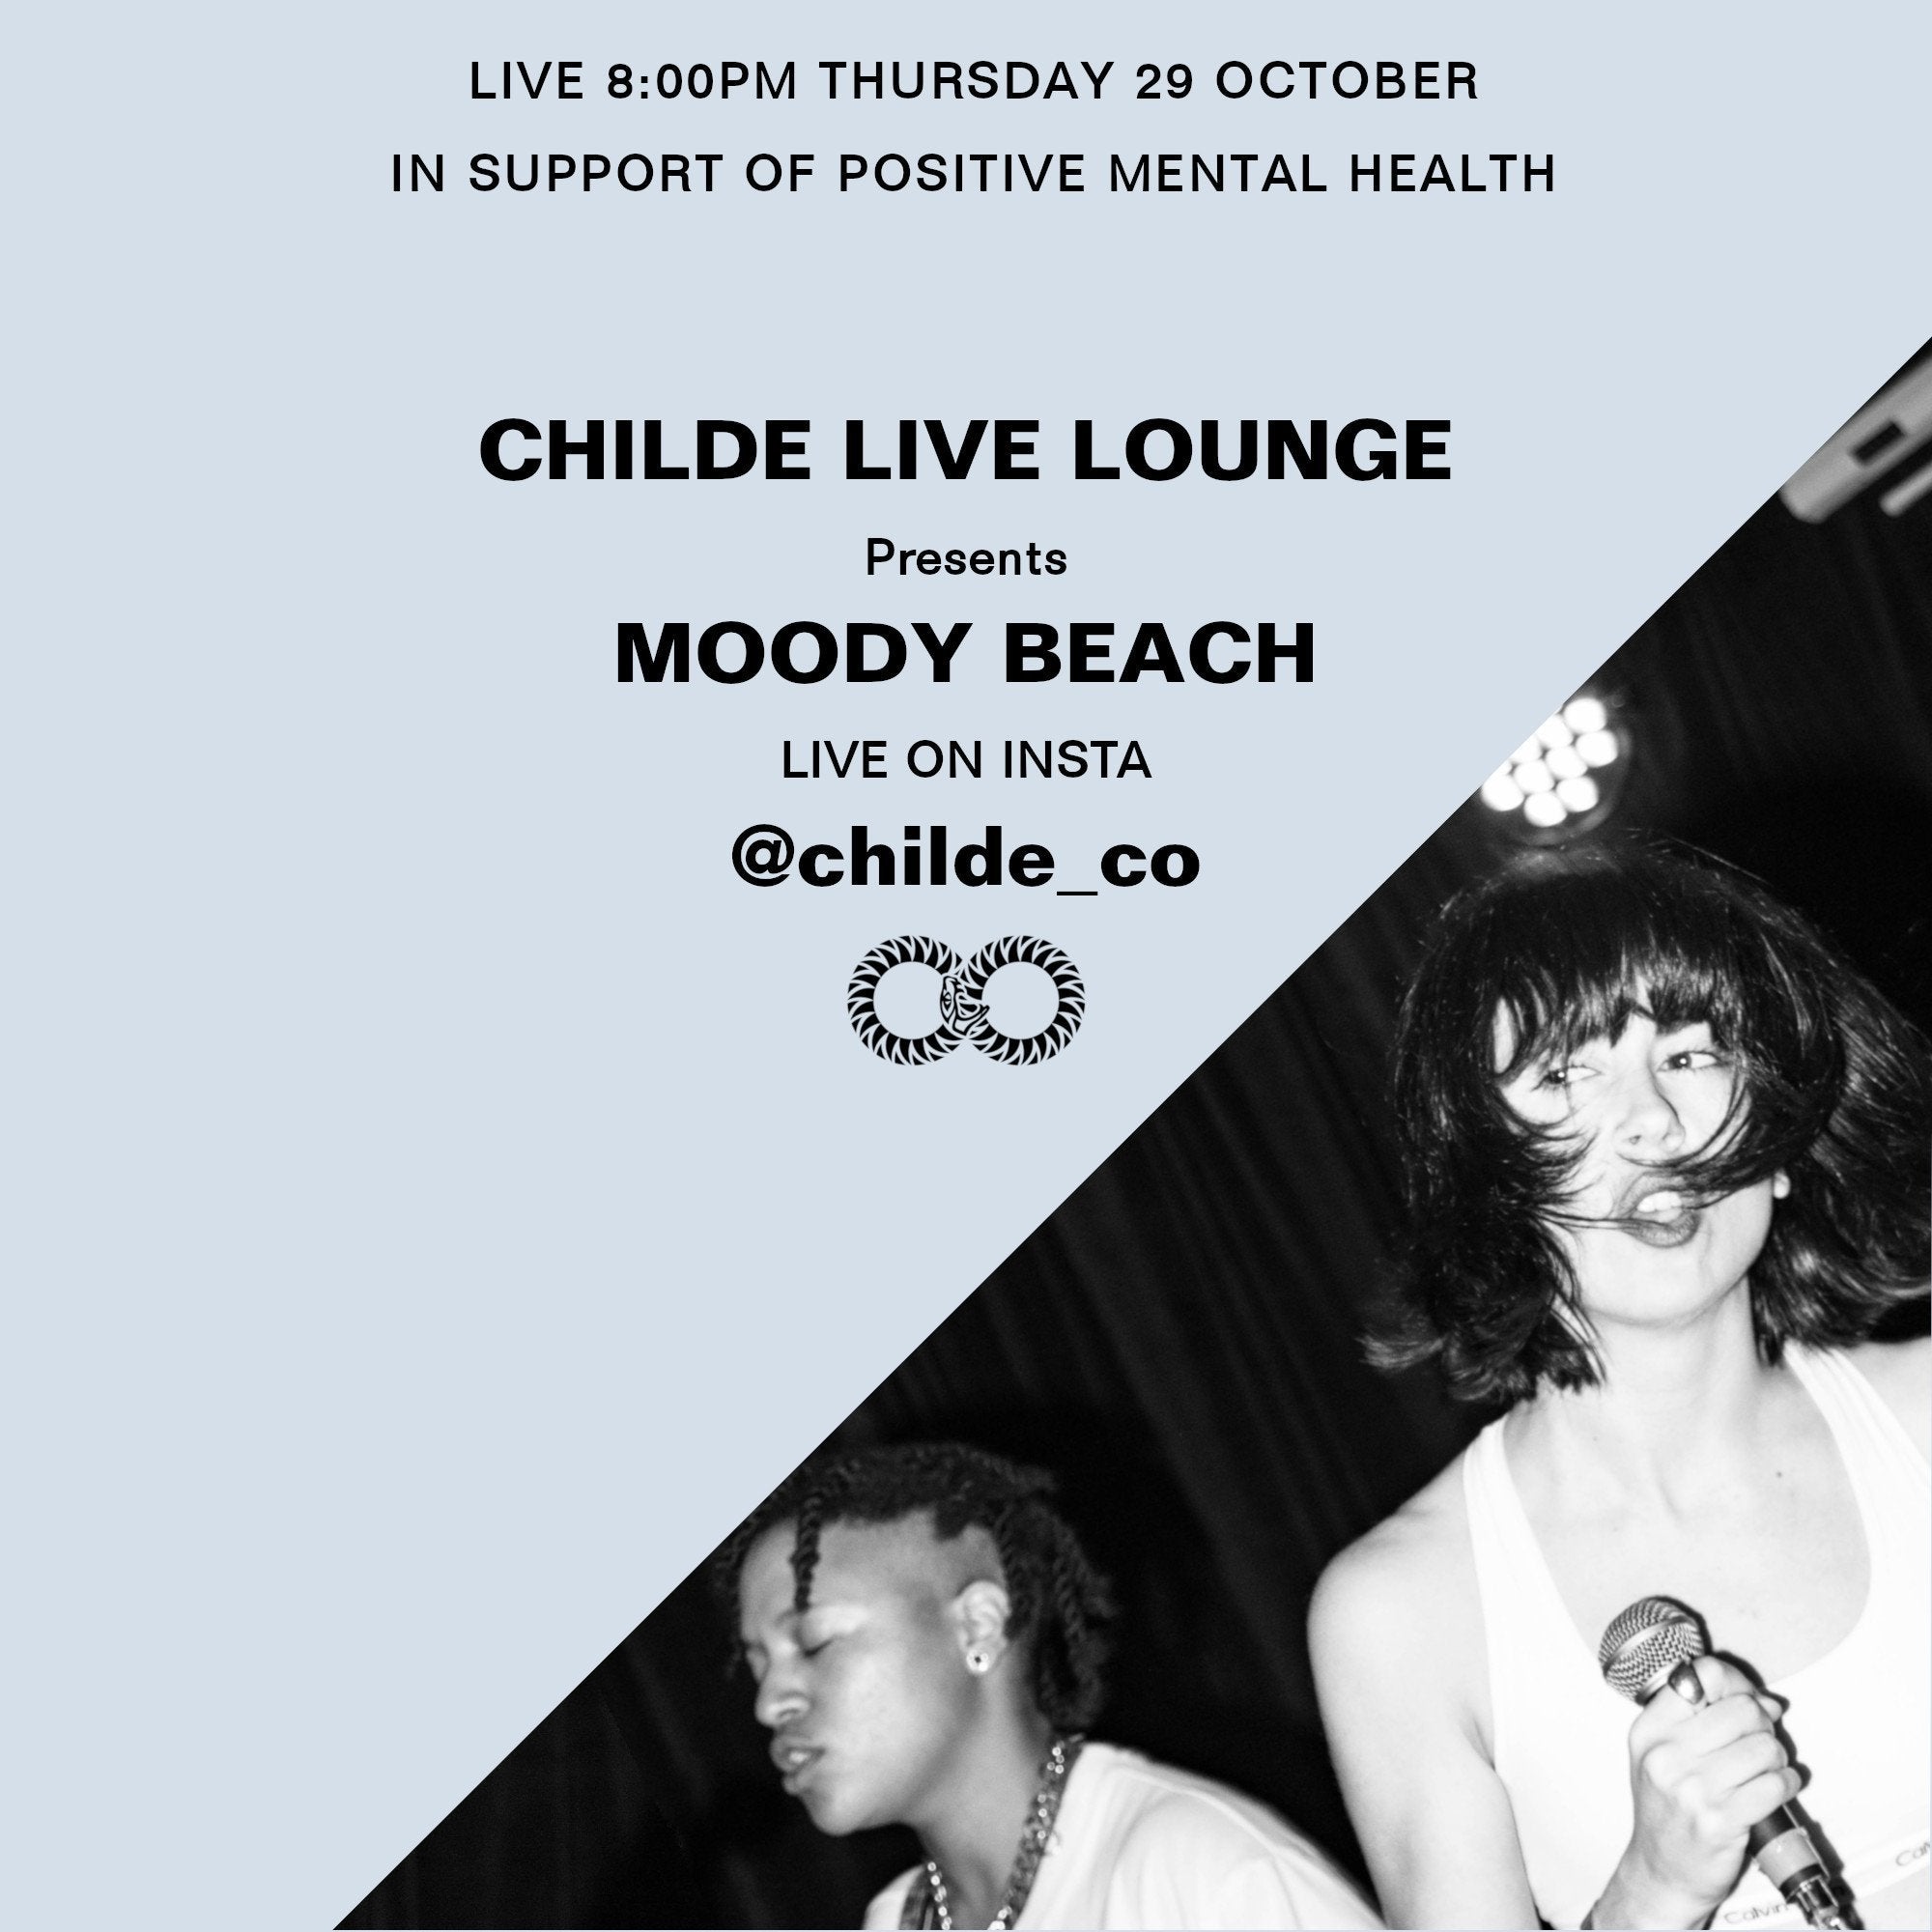 Moody Beach in Childe Live Lounge for Beyond Blue support